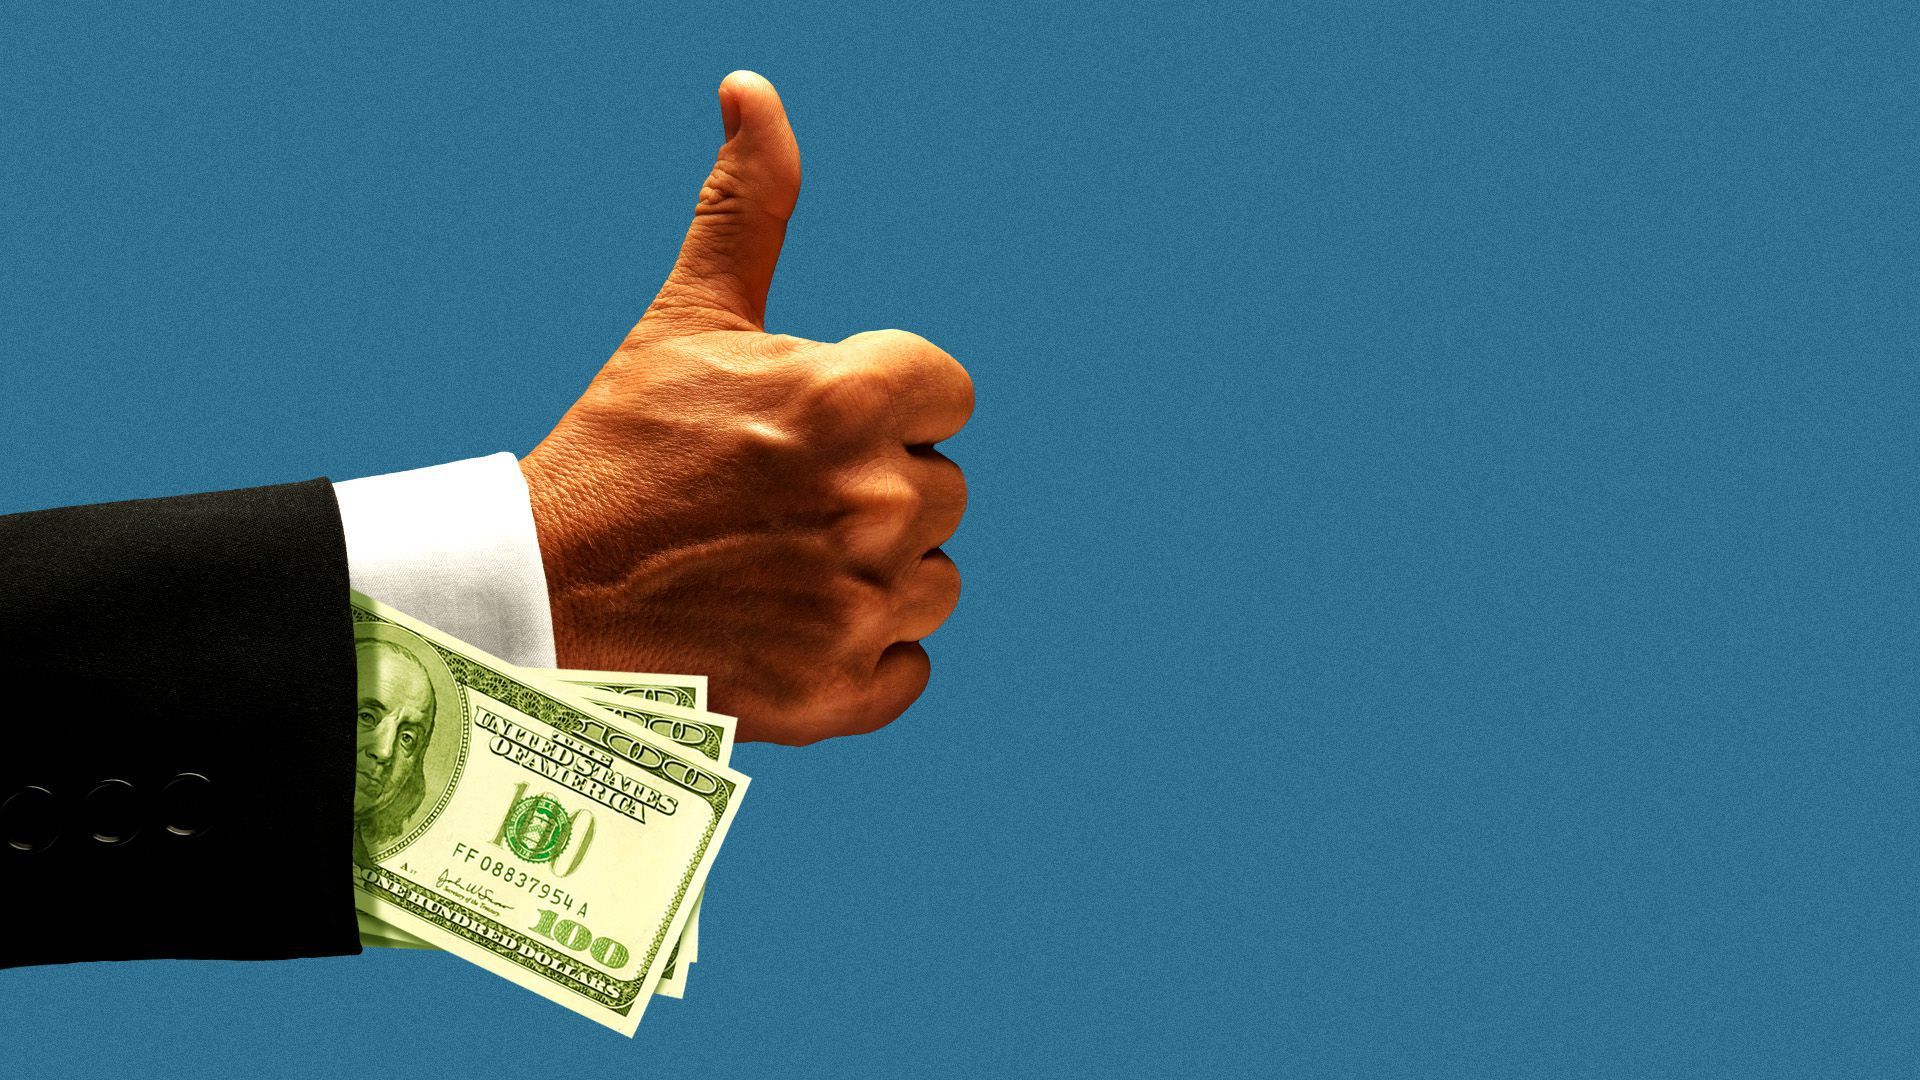 An illustration shows a cash-stuffed sleeve and a hand giving a thumbs up.